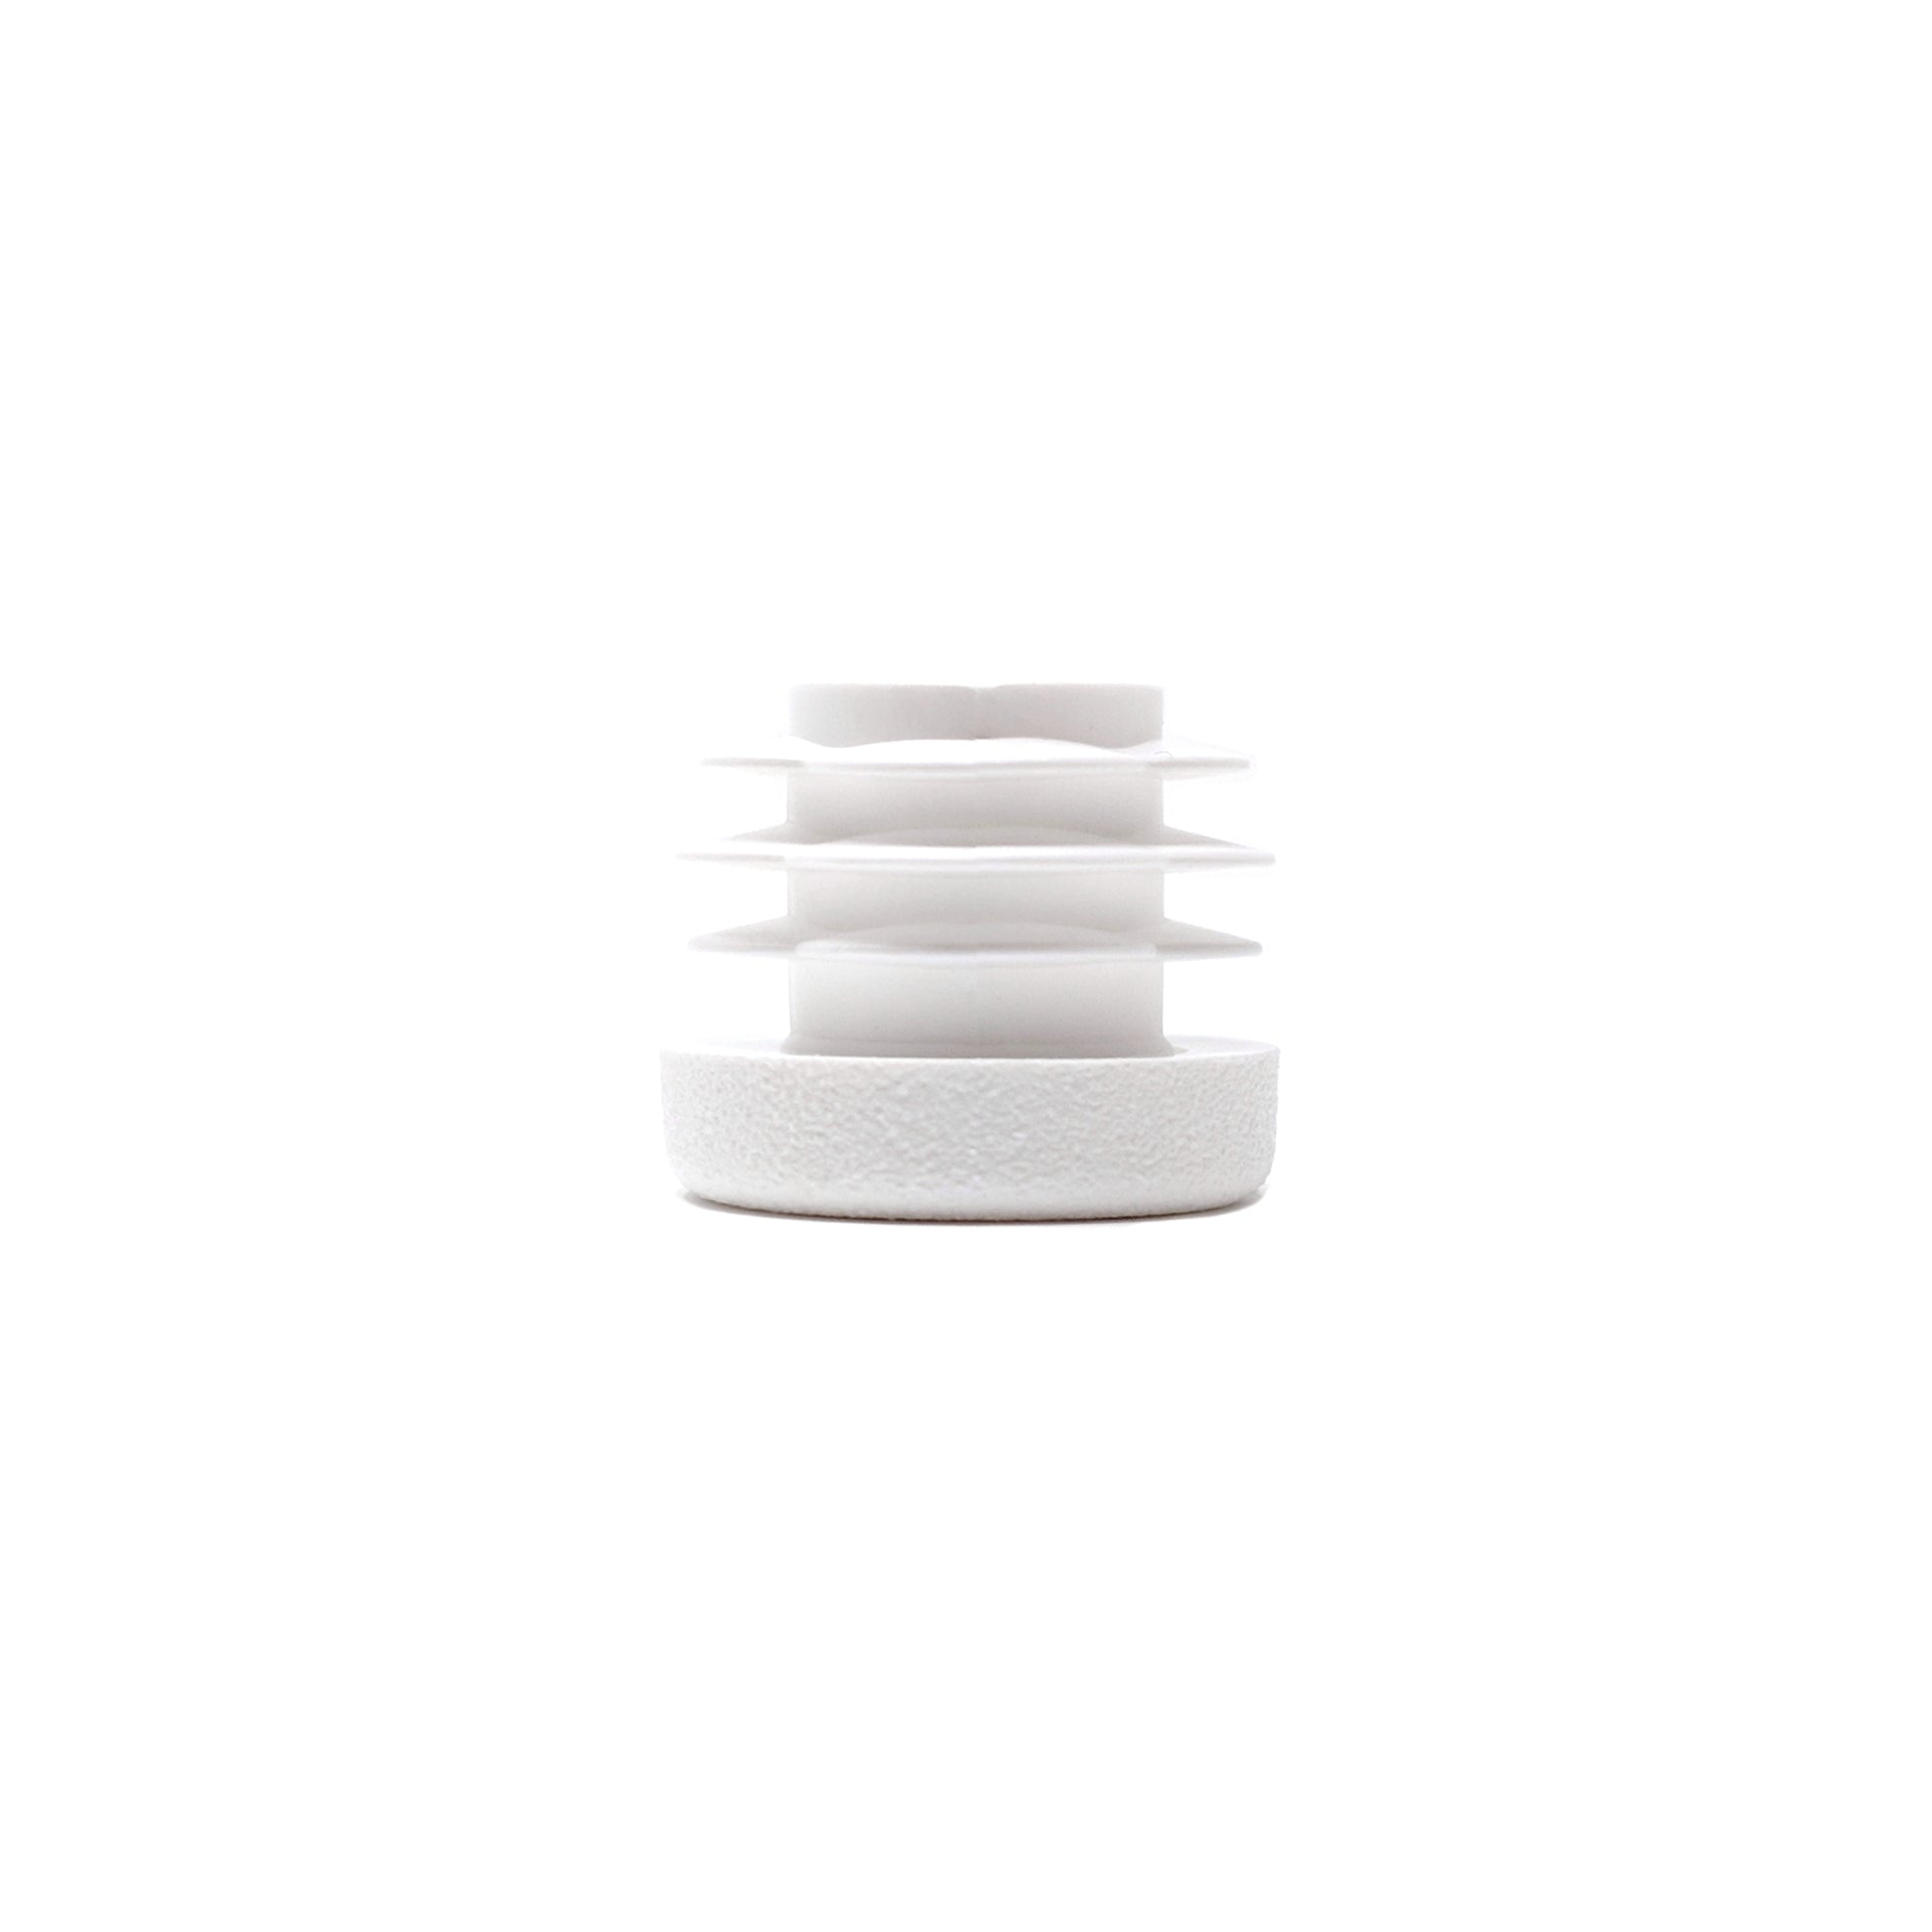 Round Tube Inserts 20mm White | Made in Germany | Keay Vital Parts - Keay Vital Parts